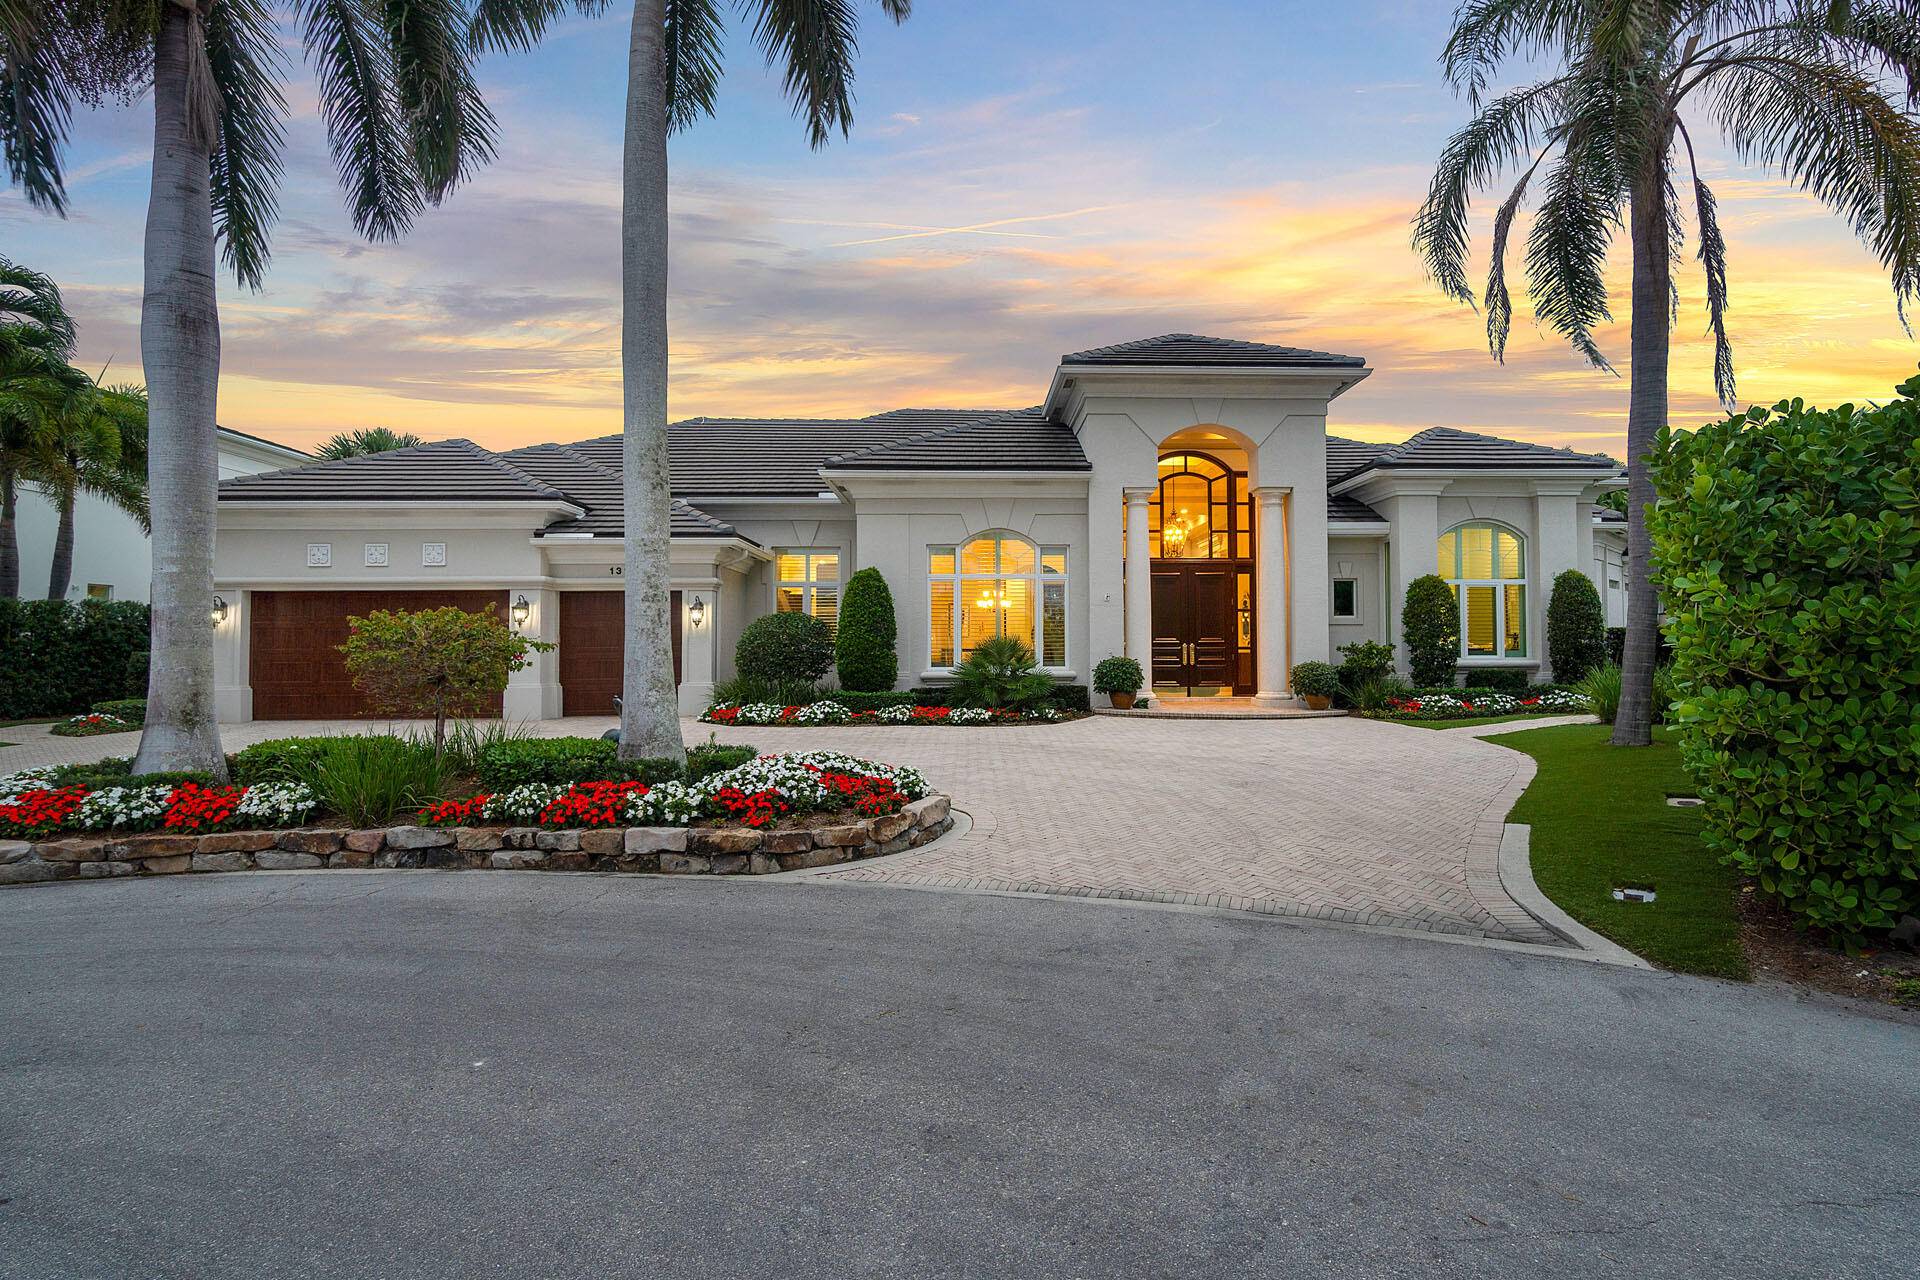 Welcome to 132 Thatch Palm Cove, single story home on a quiet cul de sac in the prestigious Royal Palm Yacht Country Club.